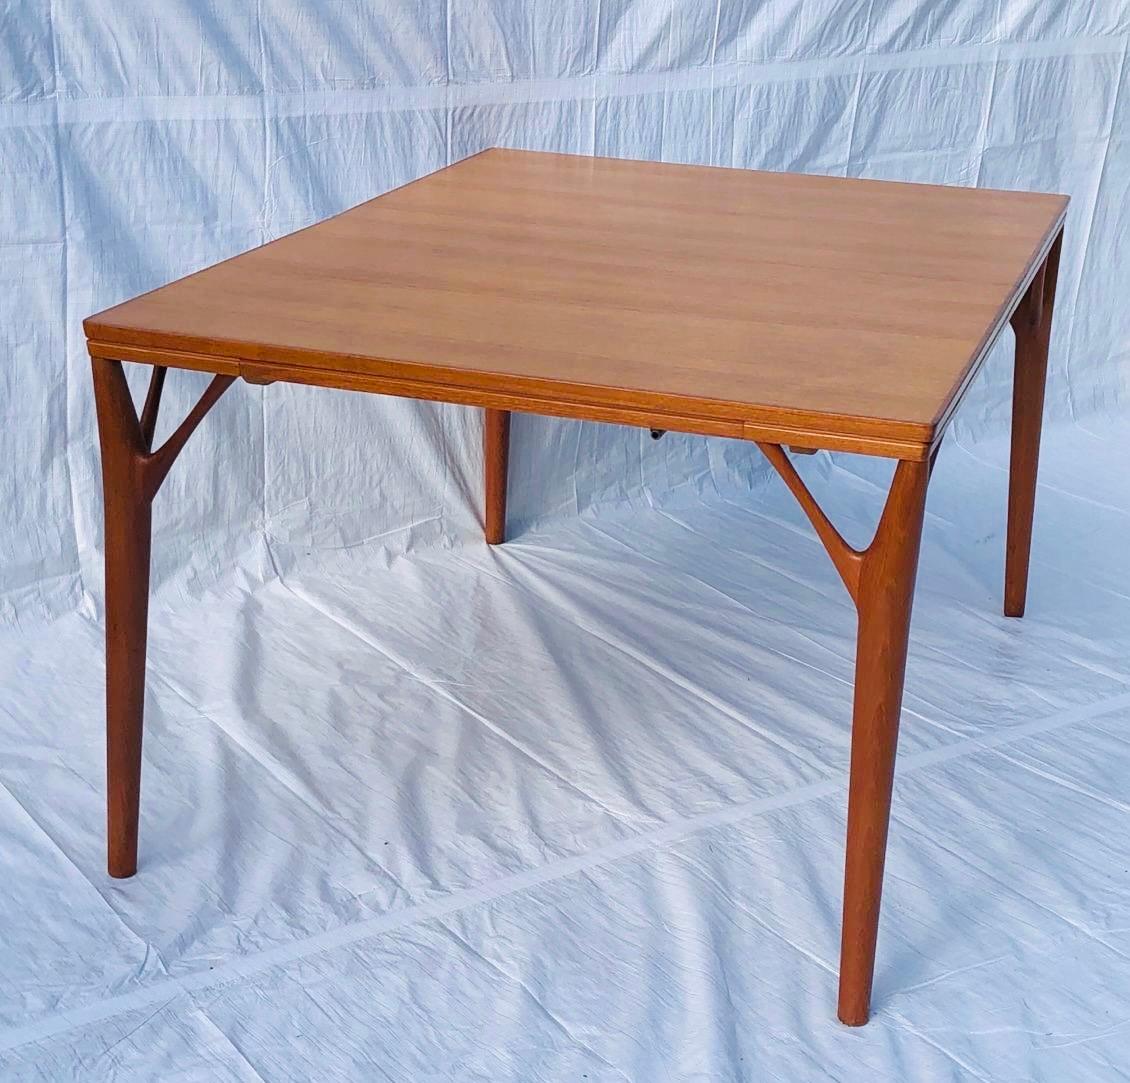 20th Century 1960s Danish Teak Willy Sigh 'Tree Leg' Dining Table Model 180 by H Sigh & Søn  For Sale